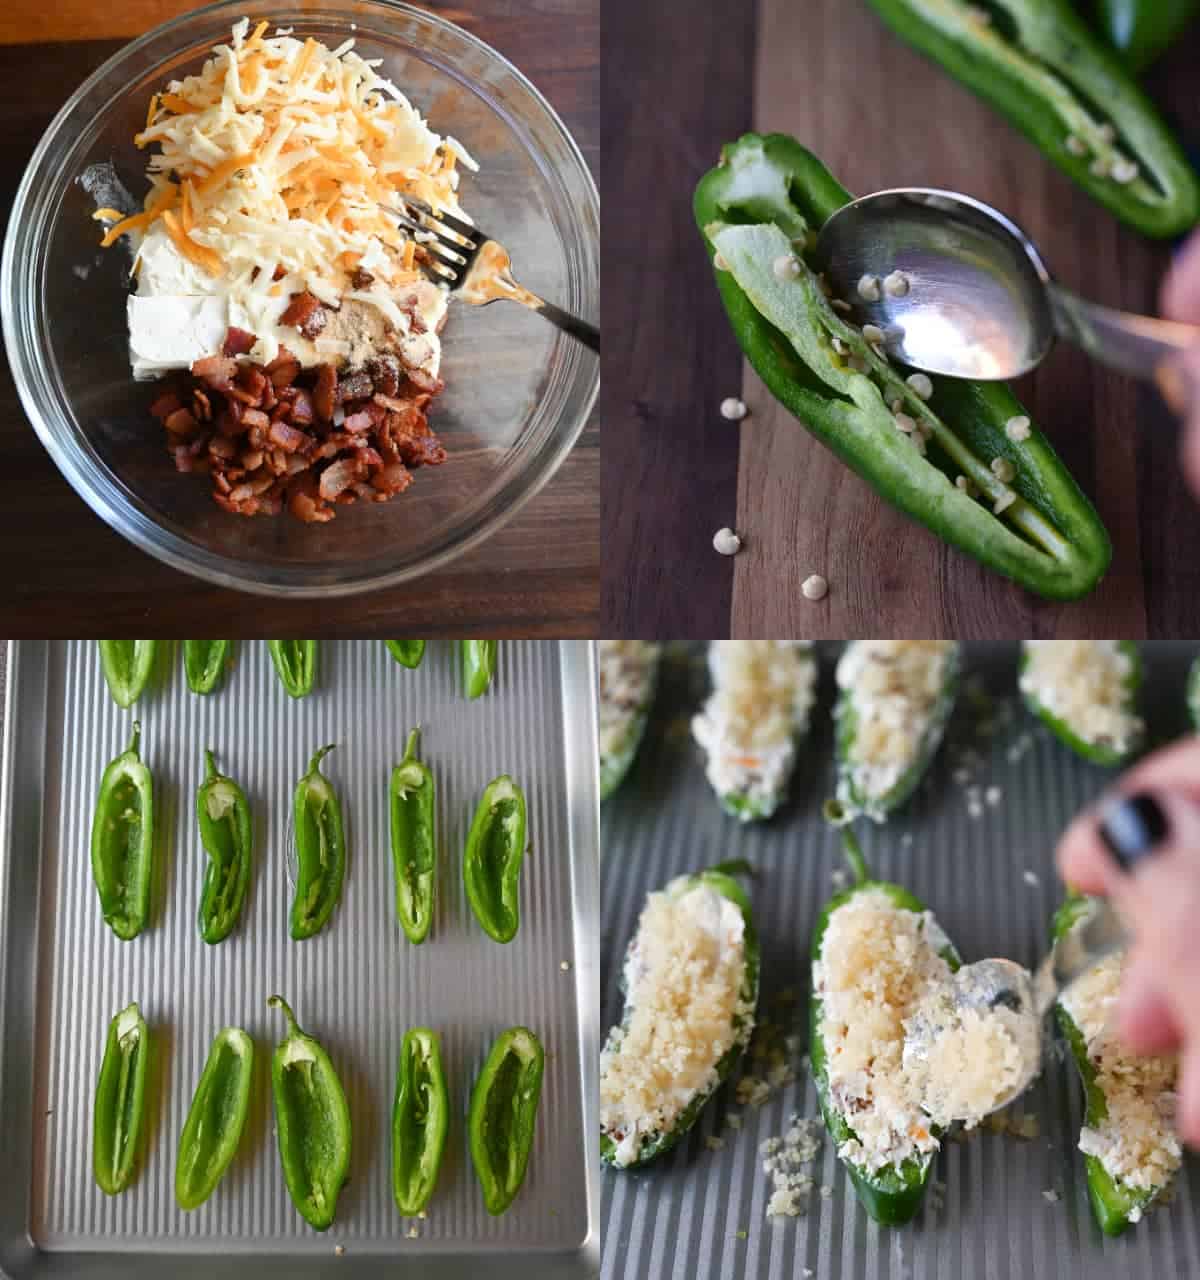 Four process photos. First one, all the cheese ingredients in a small clear bowl ready to be mixed. Second one, a spoon scooping out the seeds of a jalapeno. Third one, all the seeded jalapenos placed on a baking sheet. Fourth one, cheese filed jalapeno with panko bread crumbs sprinkled on top.